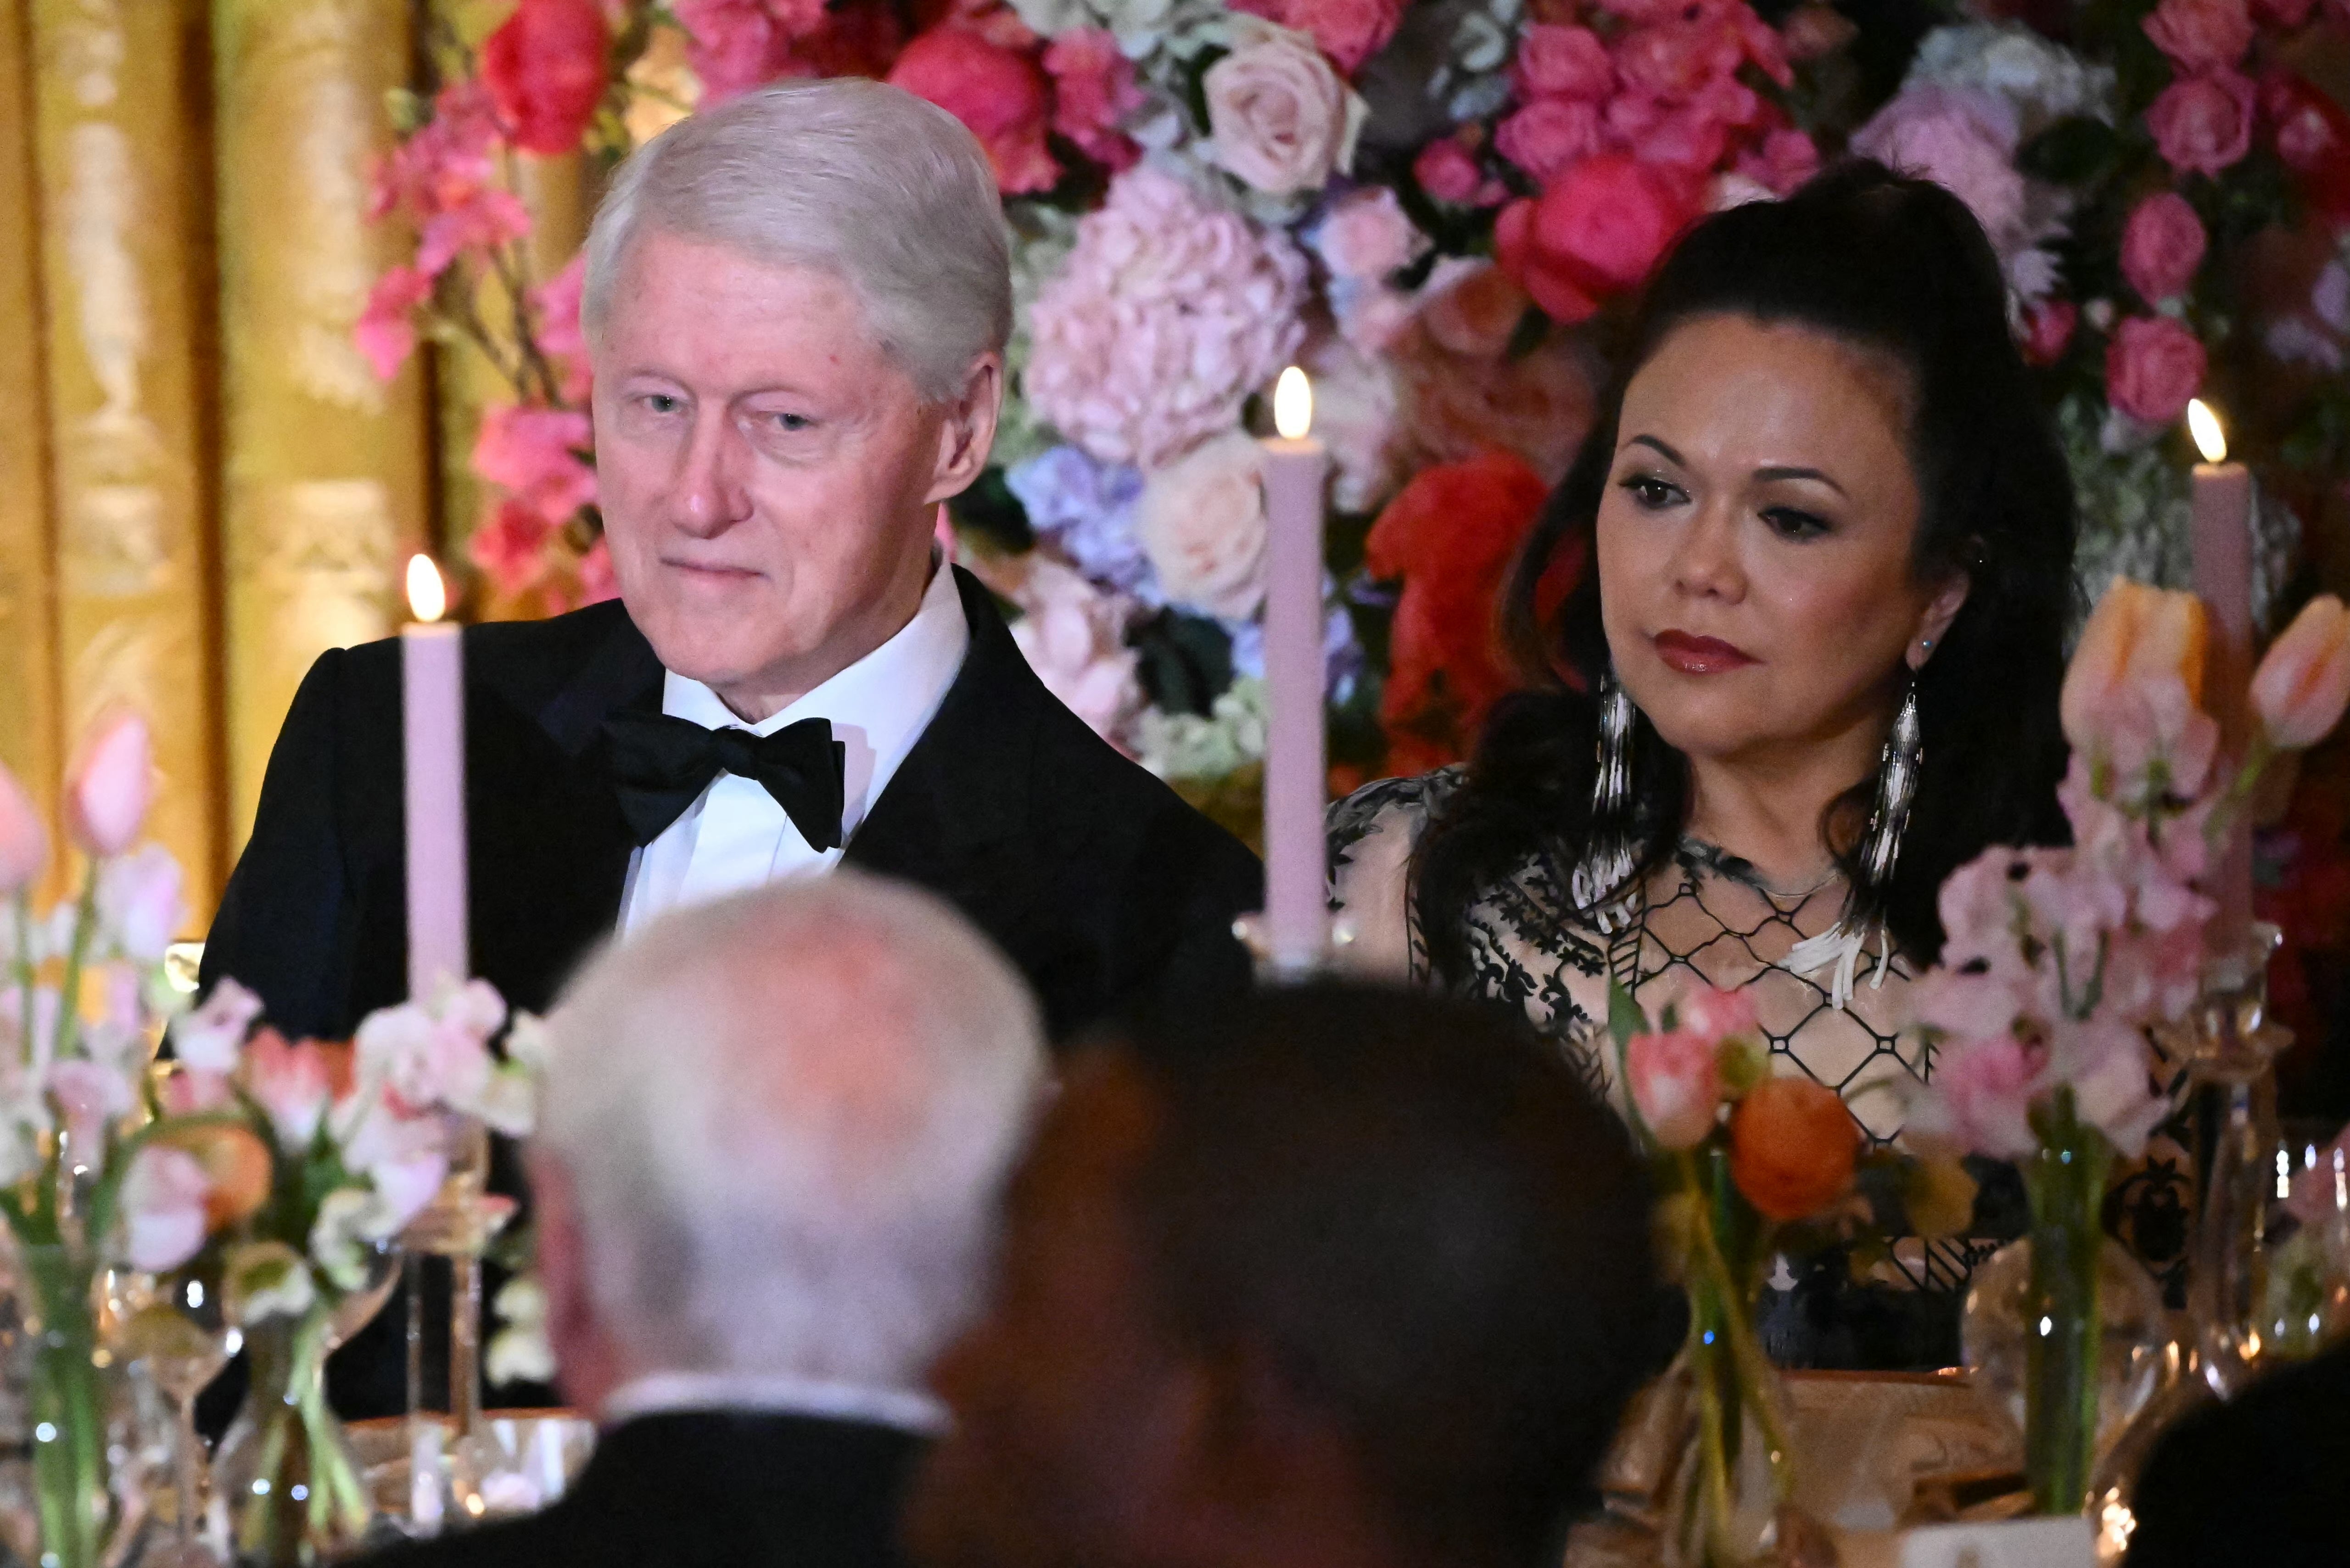 Former US president Bill Clinton attends a state dinner for Japanese prime minister Fumio Kishida and his wife Yuko Kishida